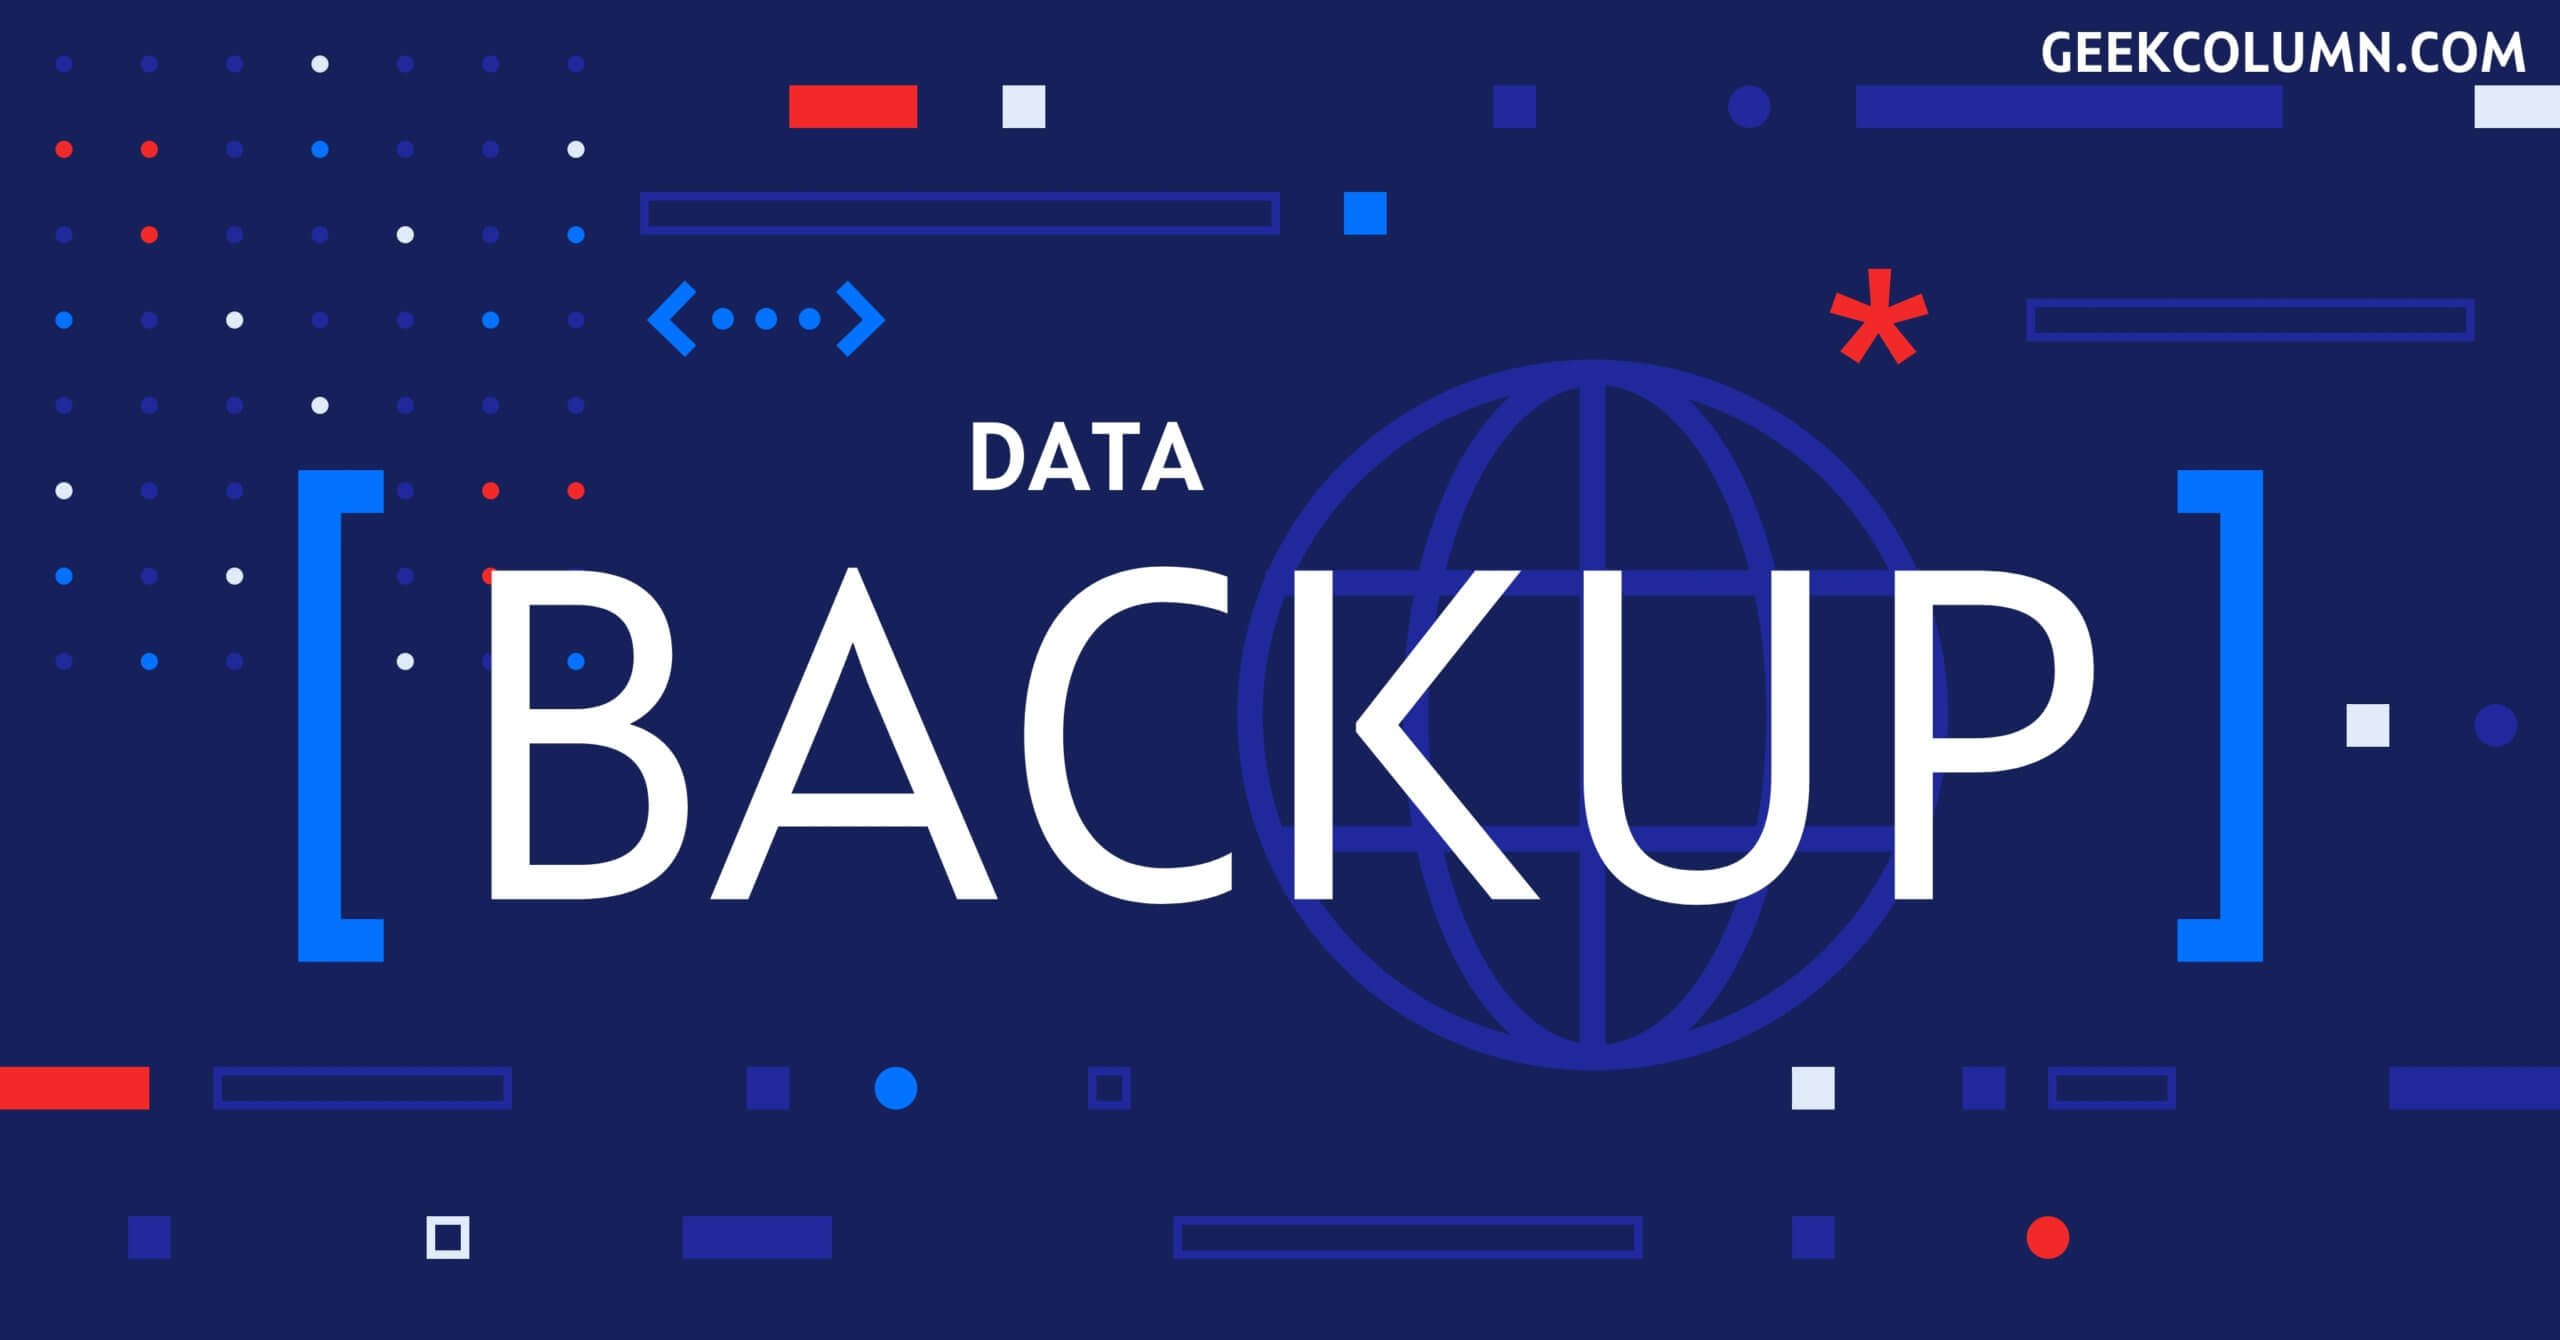 Understanding the need to Take Backup in Data Driven World